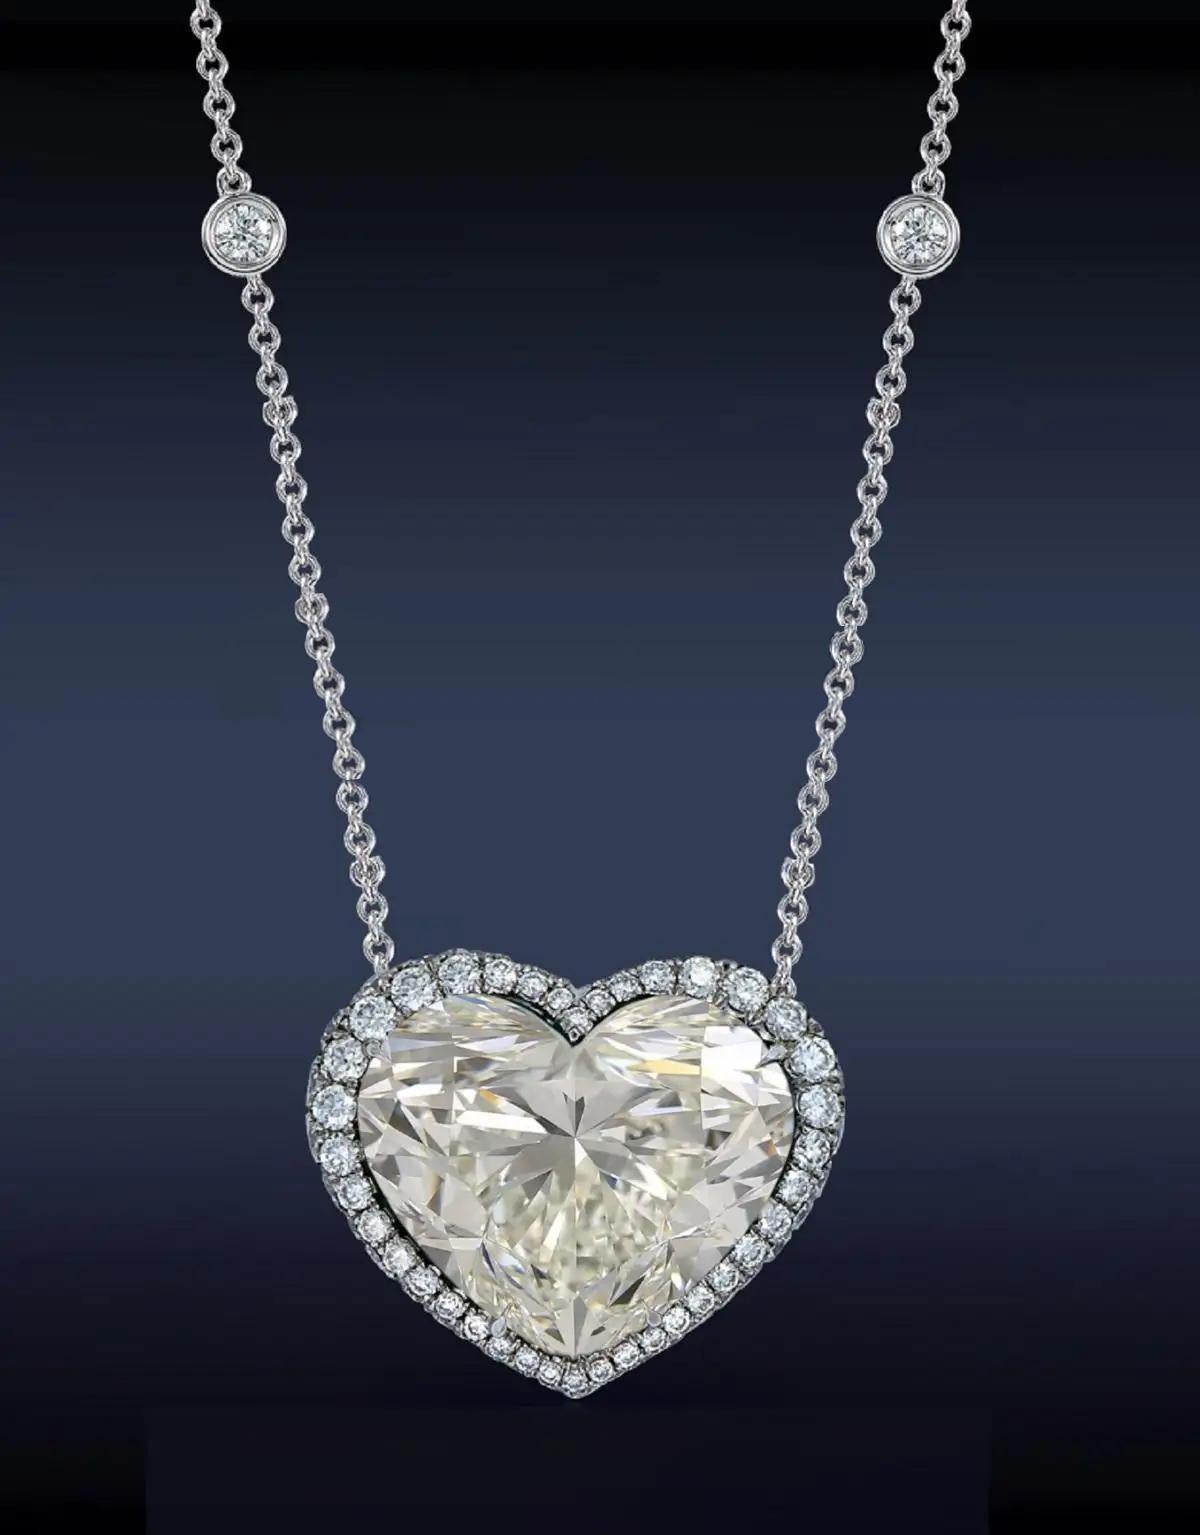 This diamond pendant necklace showcases a superb 10.02  heart shaped center diamond, GIA certified. 

It is surrounded by a halo of round brilliant cut diamonds and the bail is also studded with sparkling diamonds for added brilliance in this